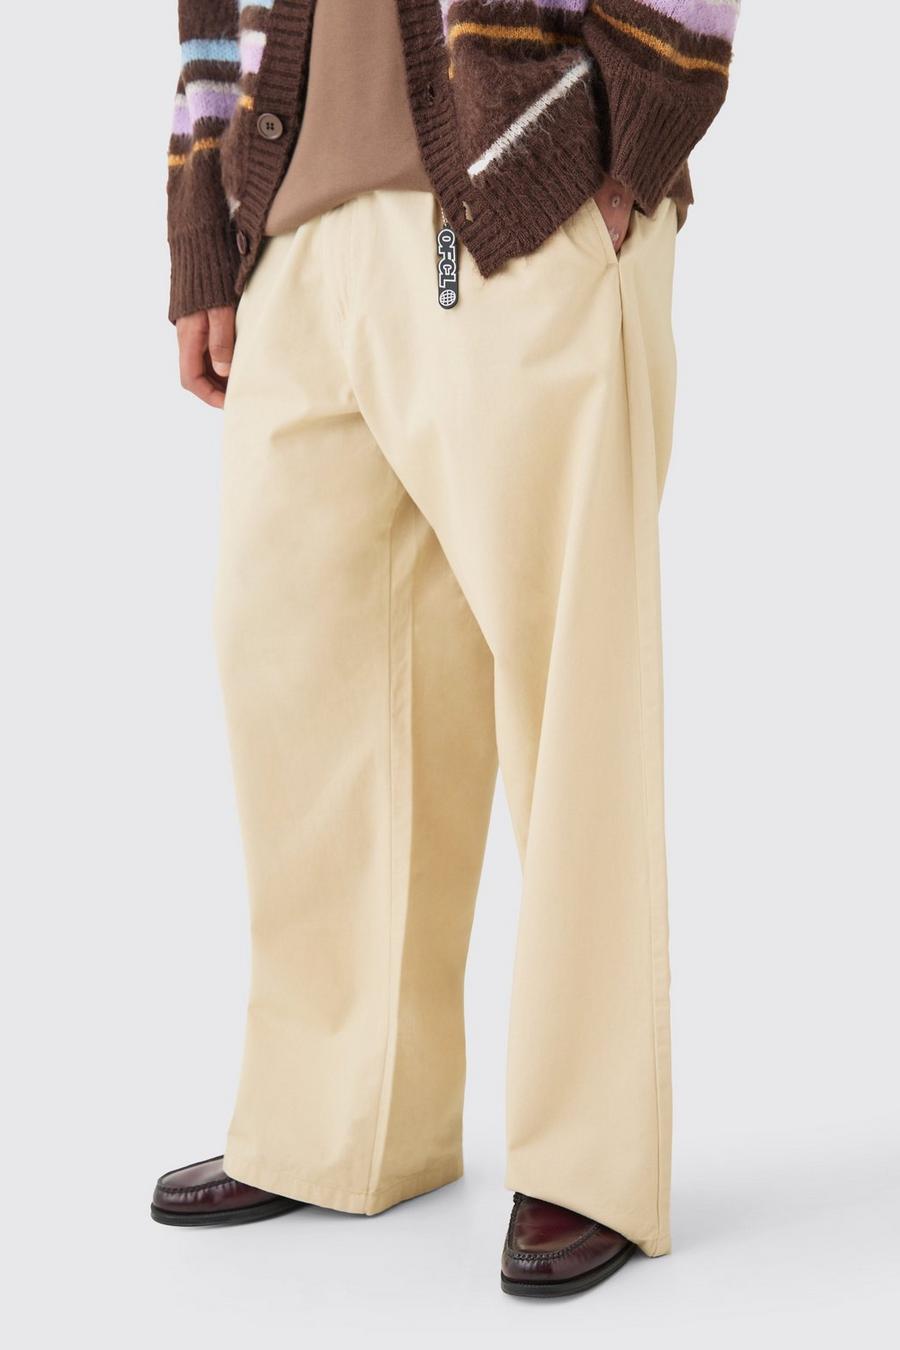 Stone Extreem Brede Chino's Met Bedeltjes, Tailleband En Tailleband image number 1